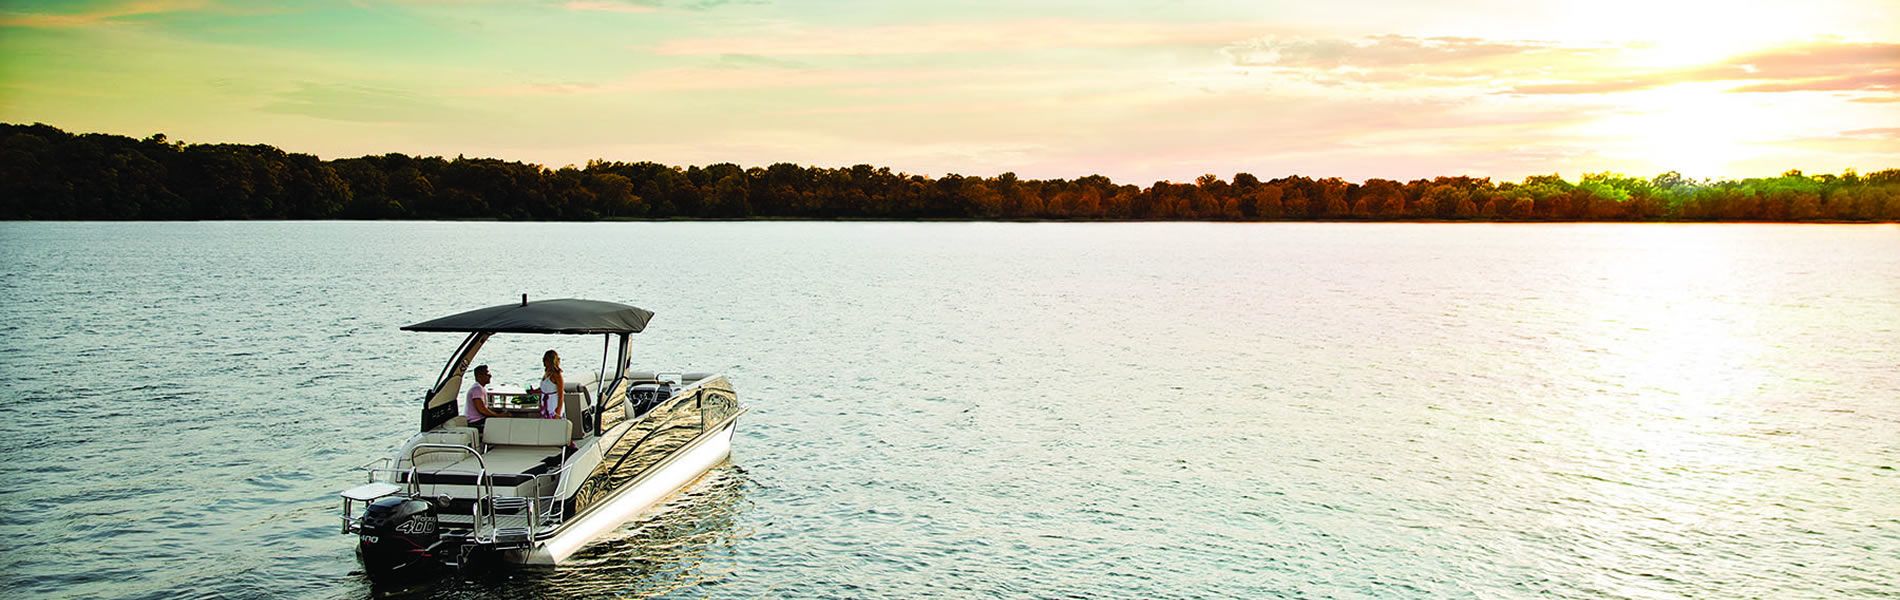 Offer The Right Boat Insurance At The Right Price